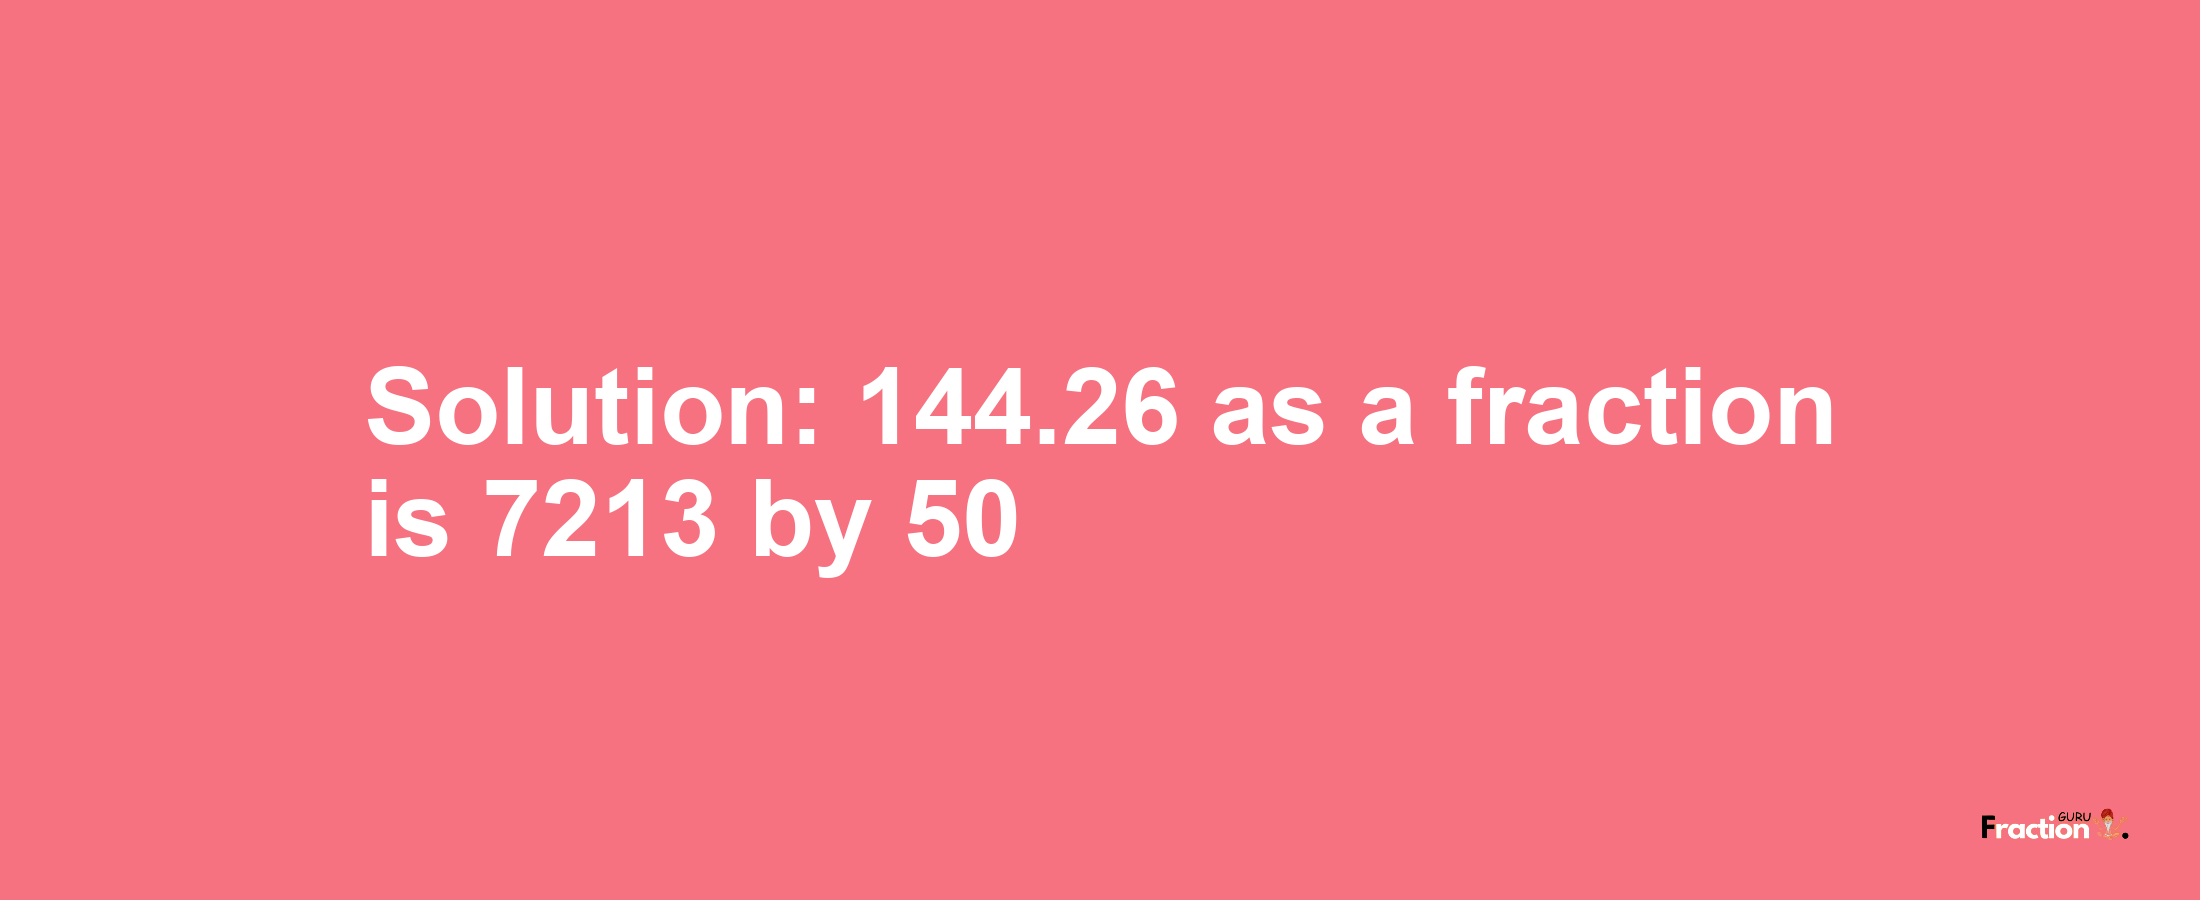 Solution:144.26 as a fraction is 7213/50